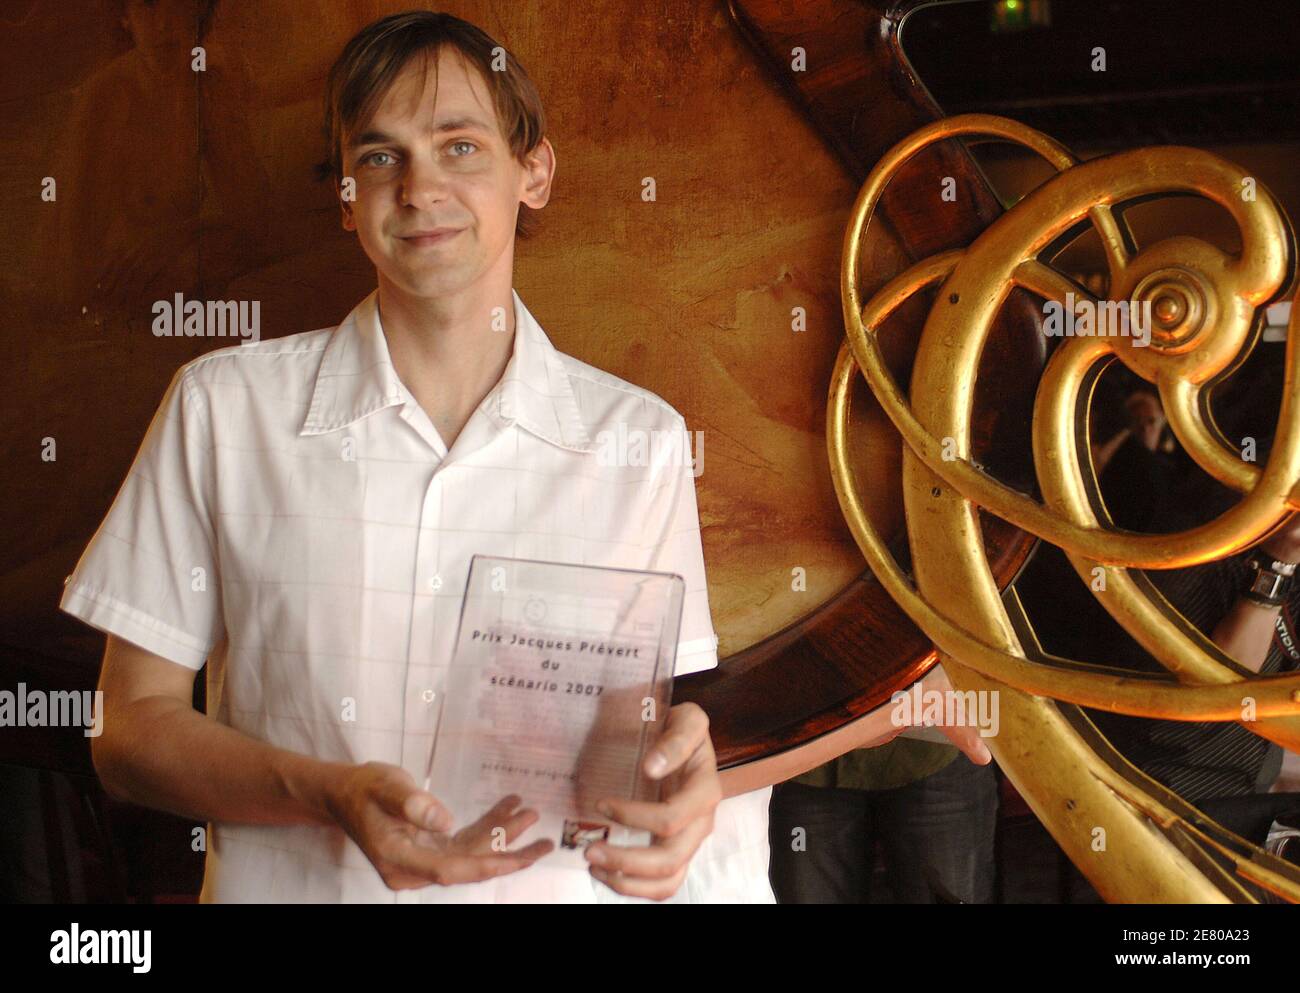 Christophe Turpin scenarist of 'Jean-Philippe' awarded during Jacques Prevert prize ceremony held at Maxim's restaurant in Paris, France on April 25, 2007. Photo by Giancarlo Gorassini/ABACAPRESS.COM Stock Photo